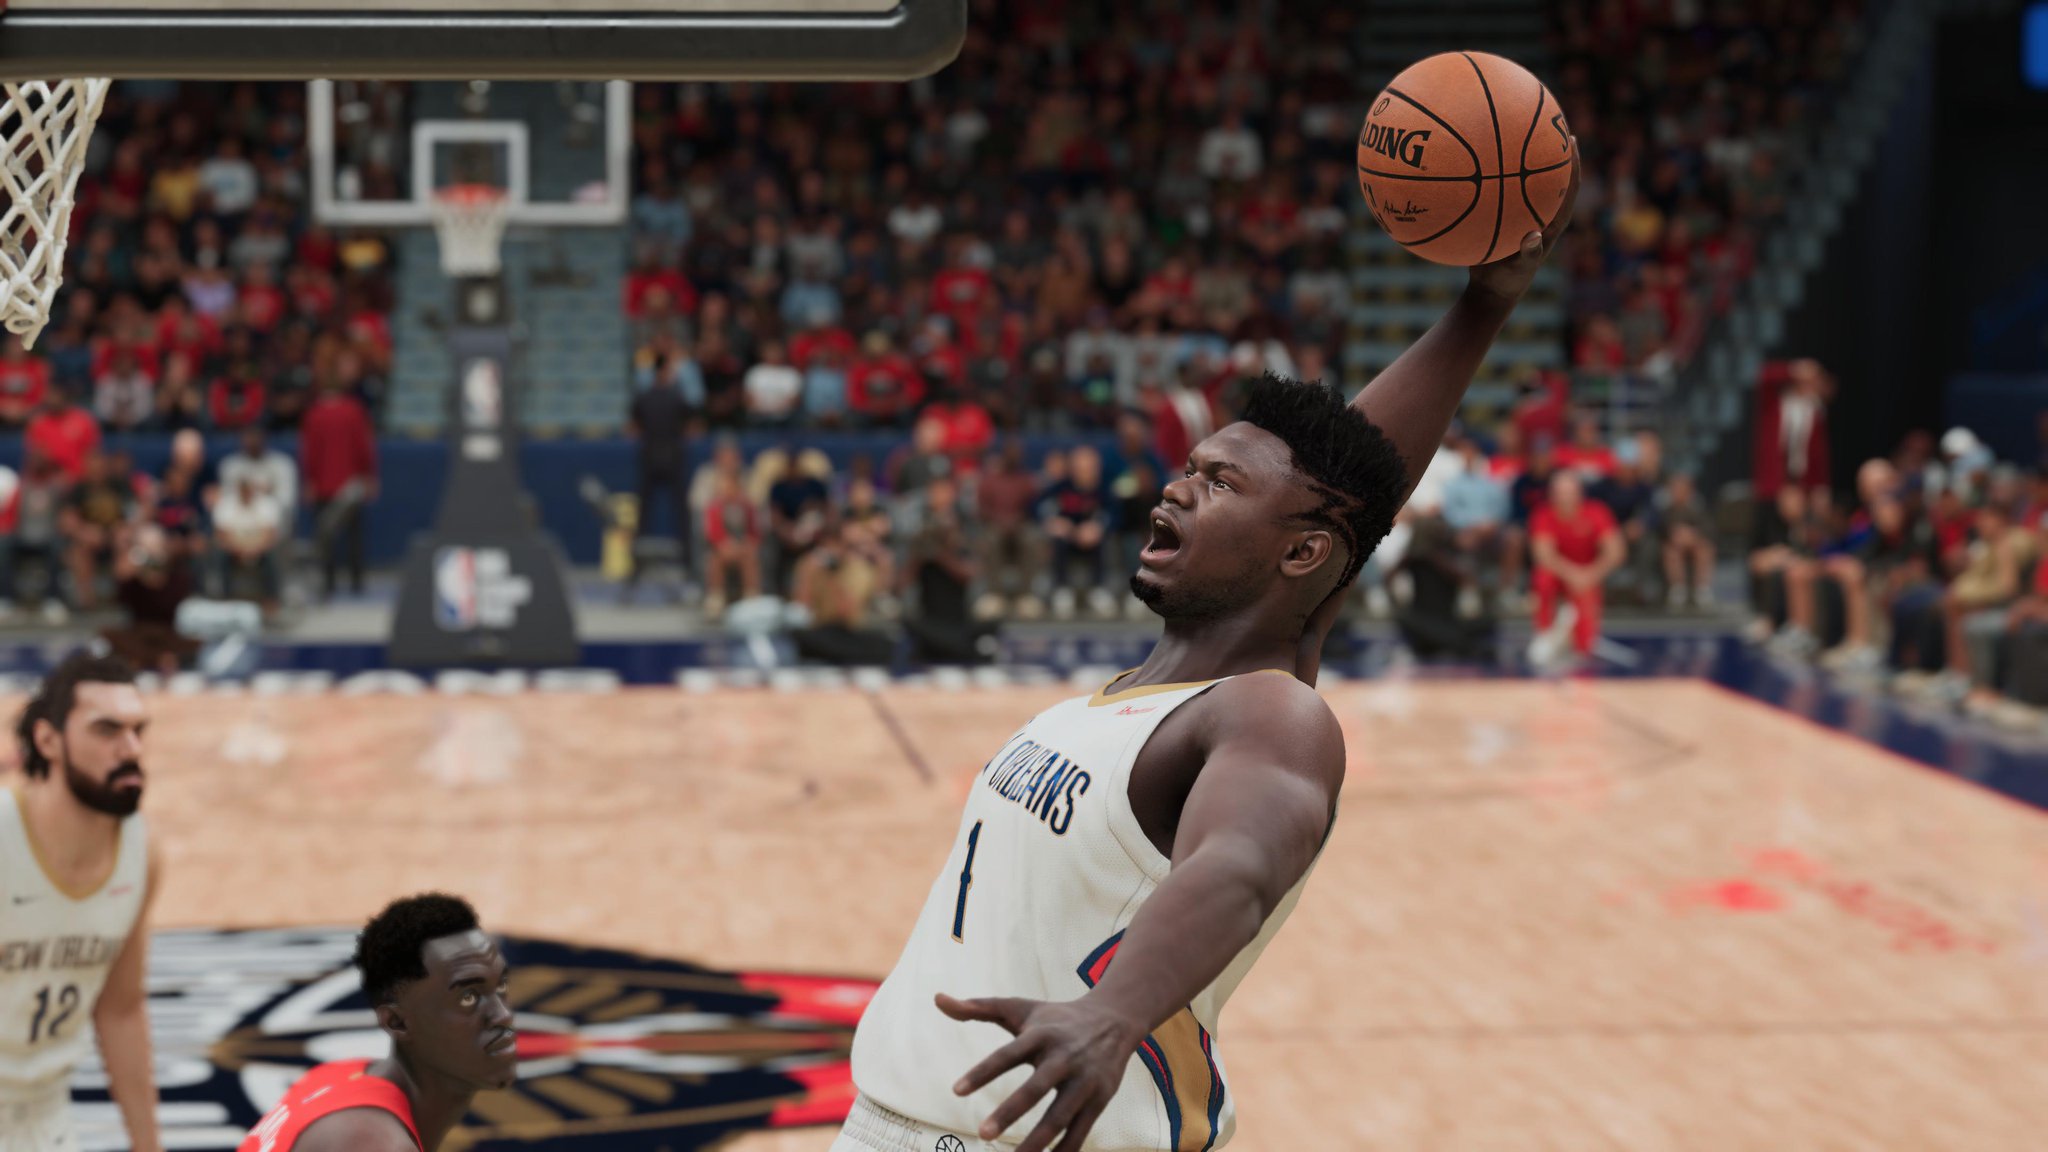 nba 2k21 update patch notes